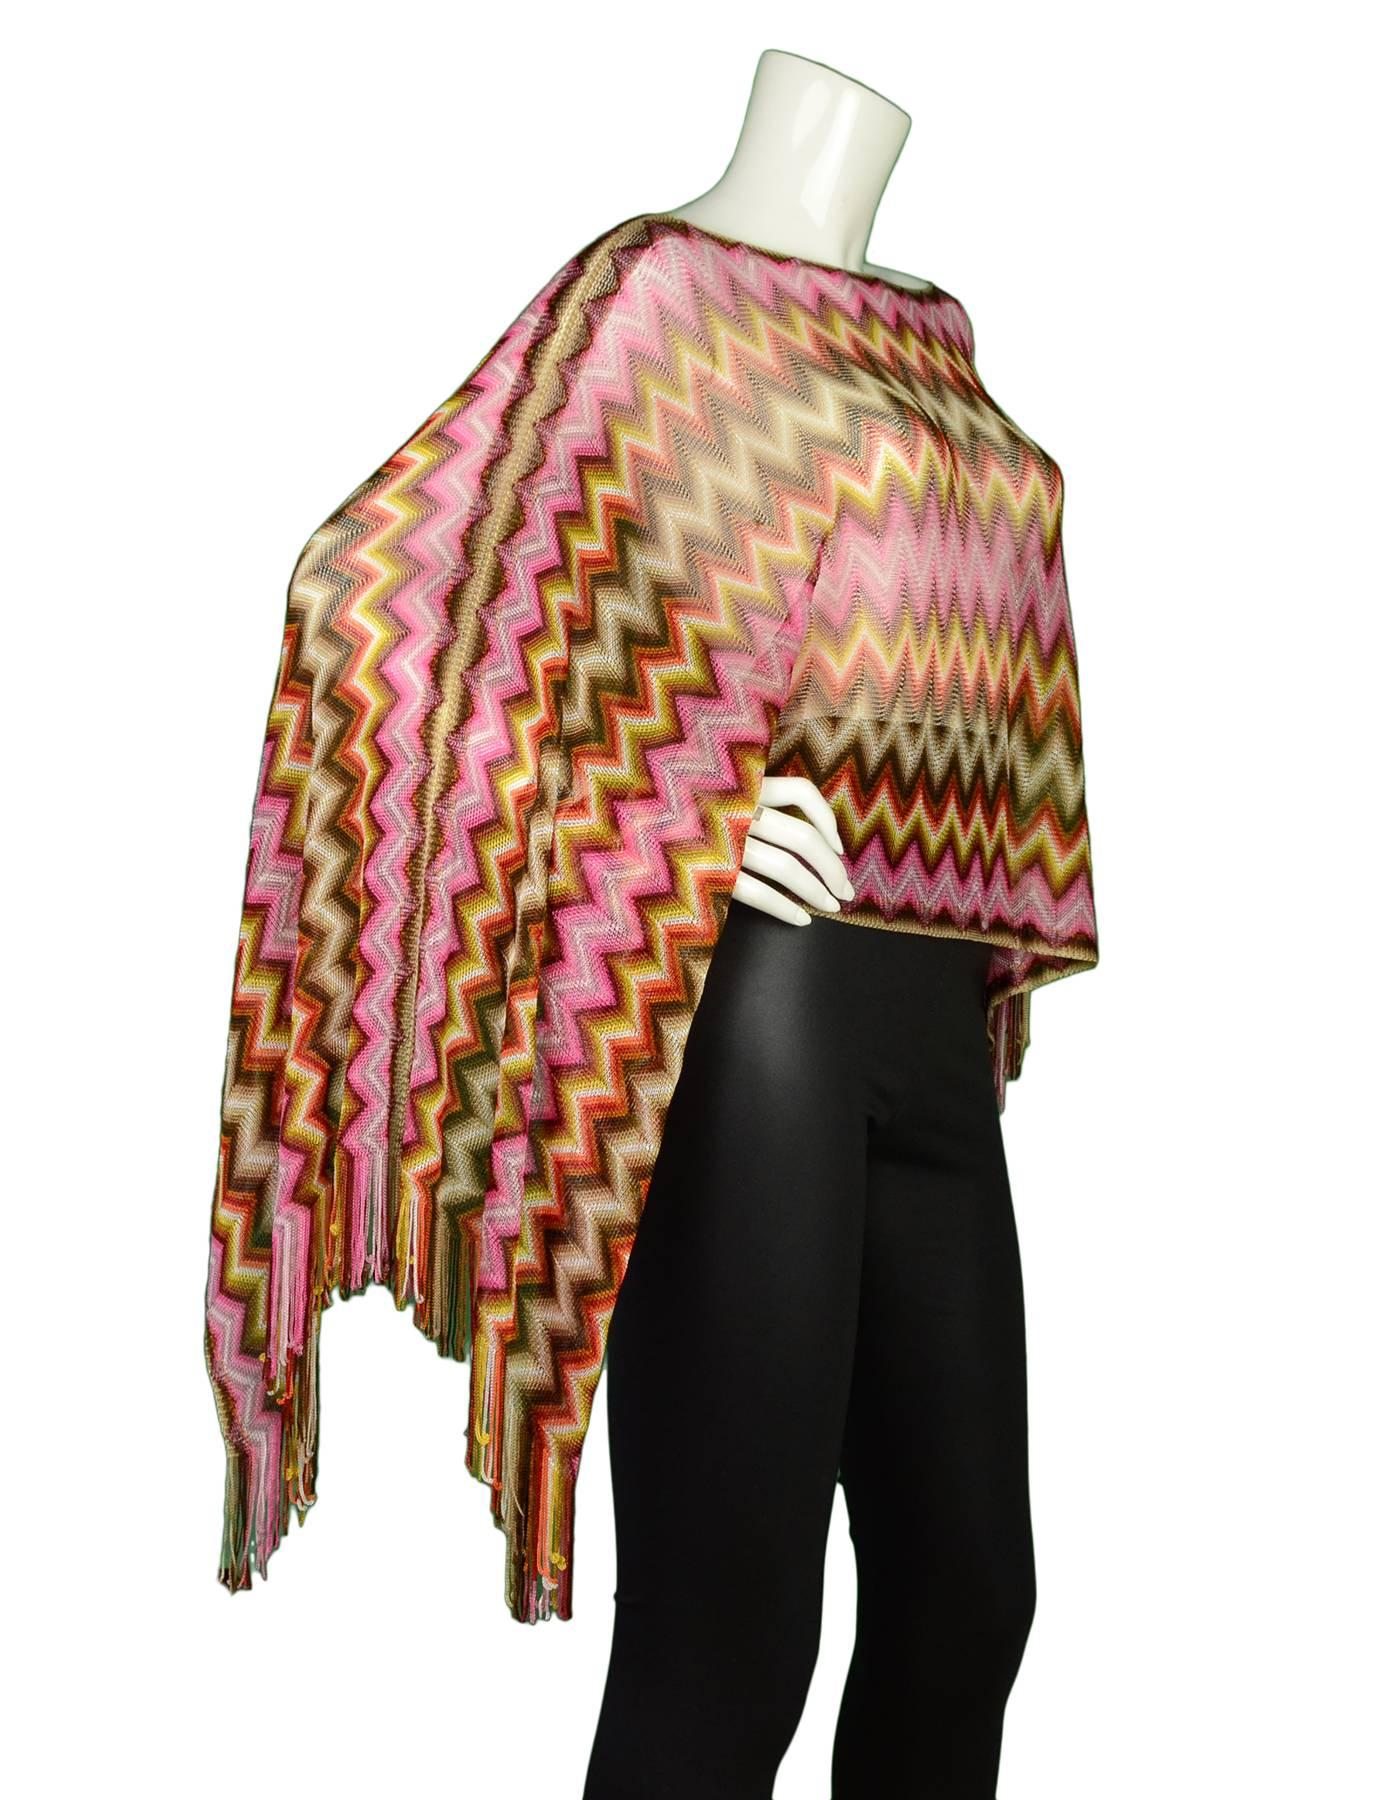 Missoni Multi-Color Knit Shawl

Features fringe detail

Made In: Italy
Color: Pink, purple, brown, orange
Composition: 100% Acetate
Overall Condition: Excellent pre-owned condition with the exception of one small snag at back left